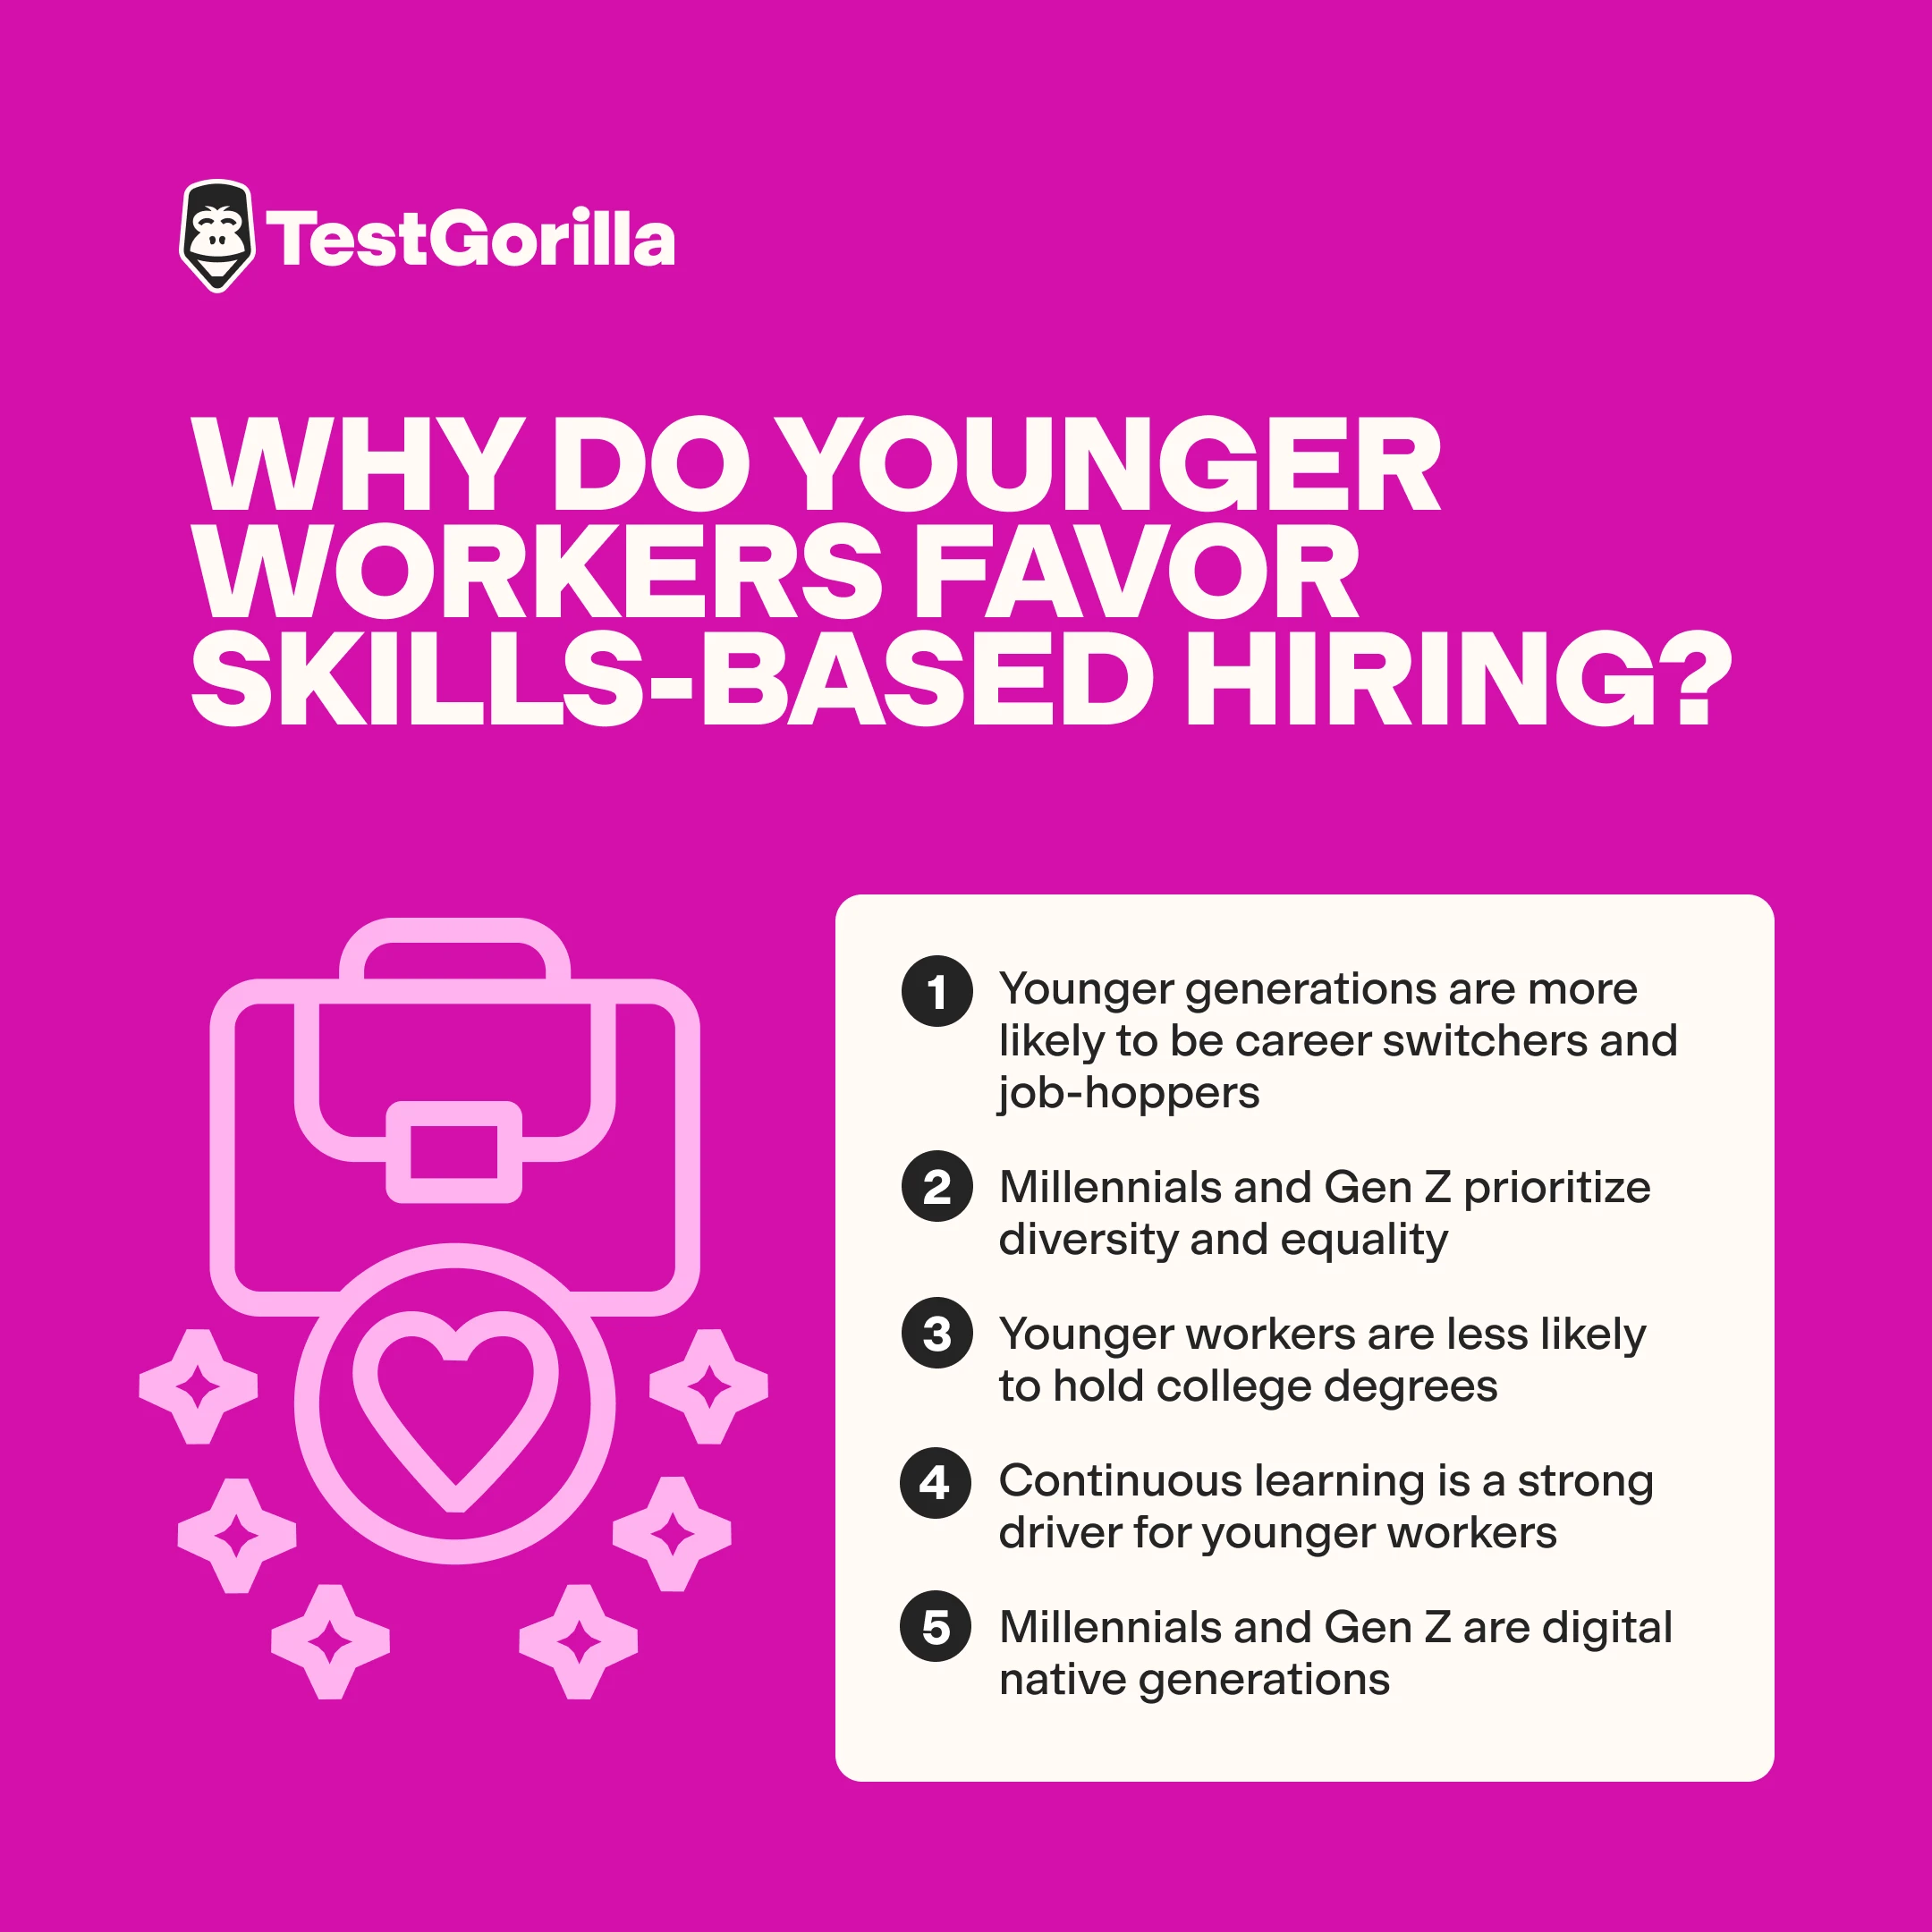 Why do younger workers favor skills based hiring